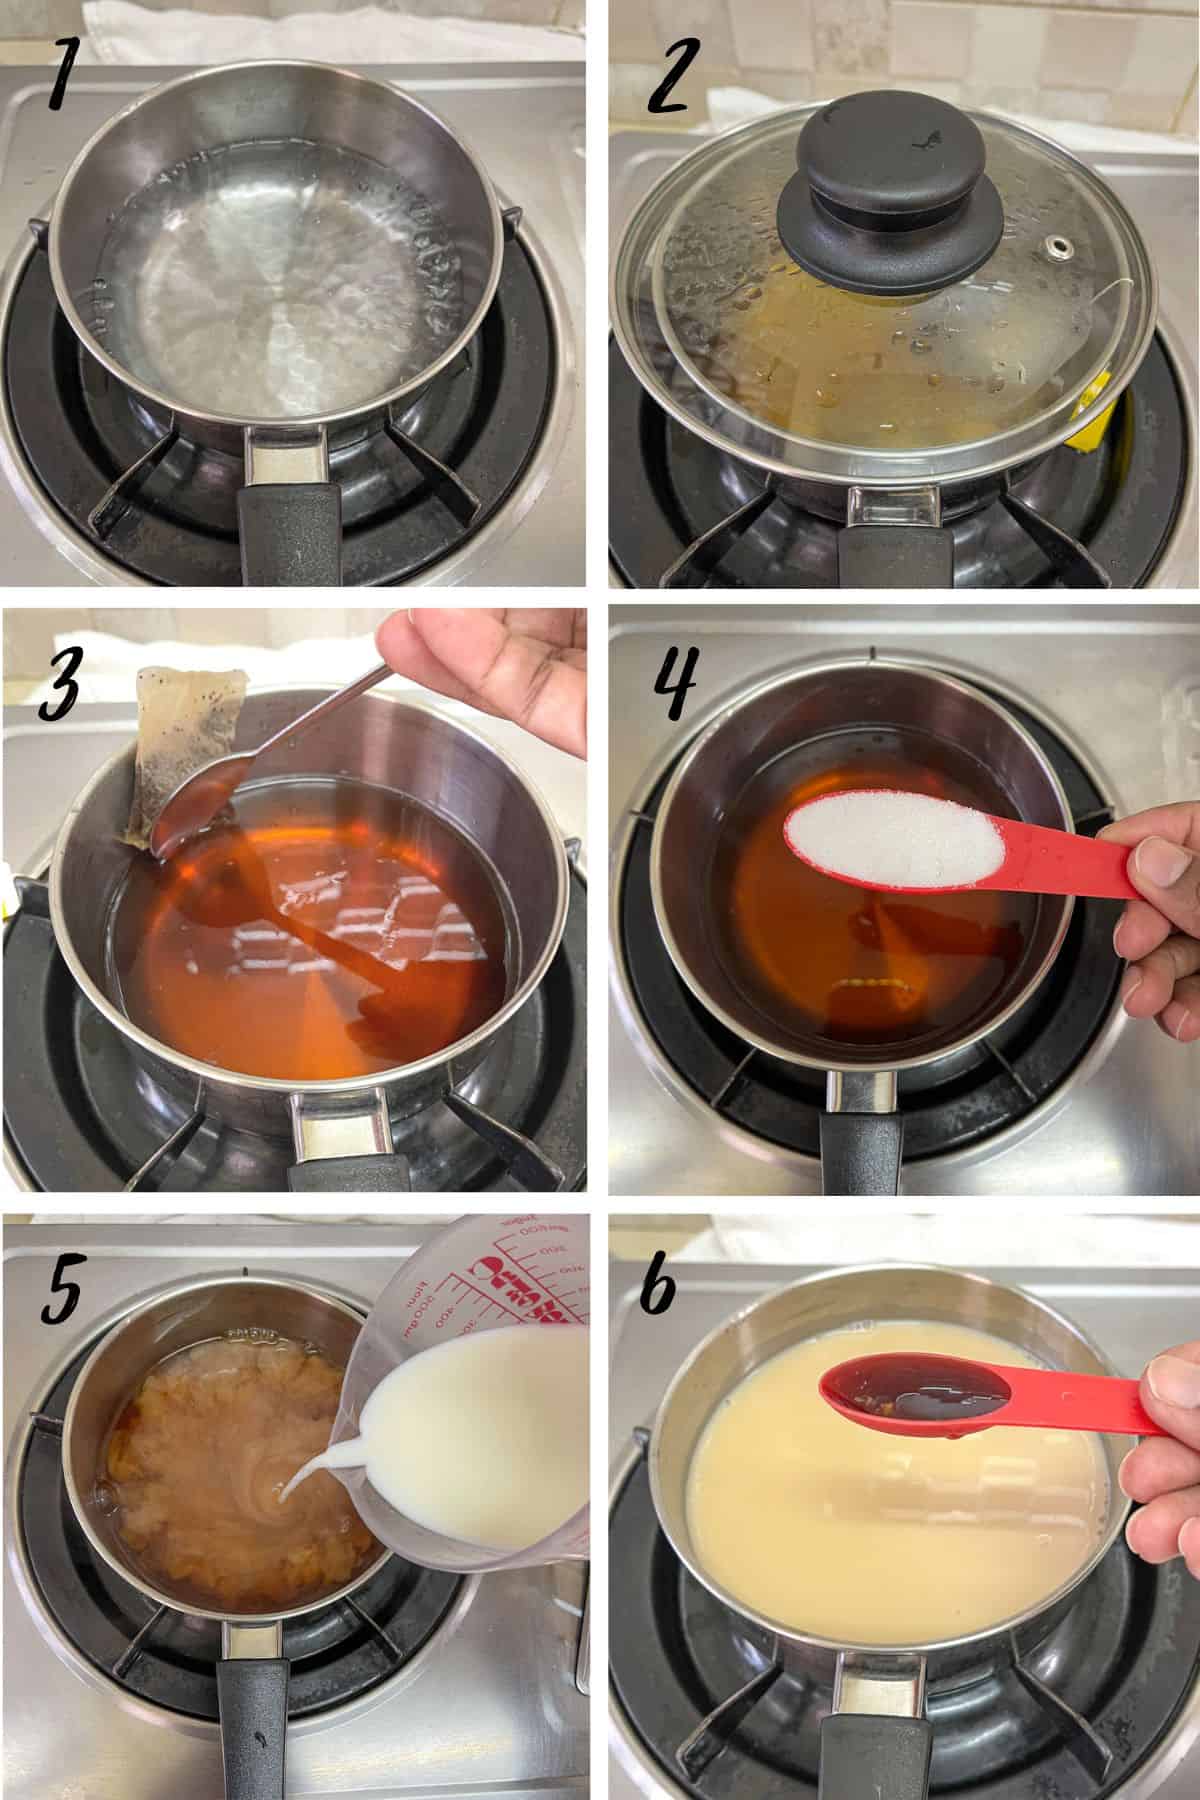 A poster of 6 images showing how to make milk tea.